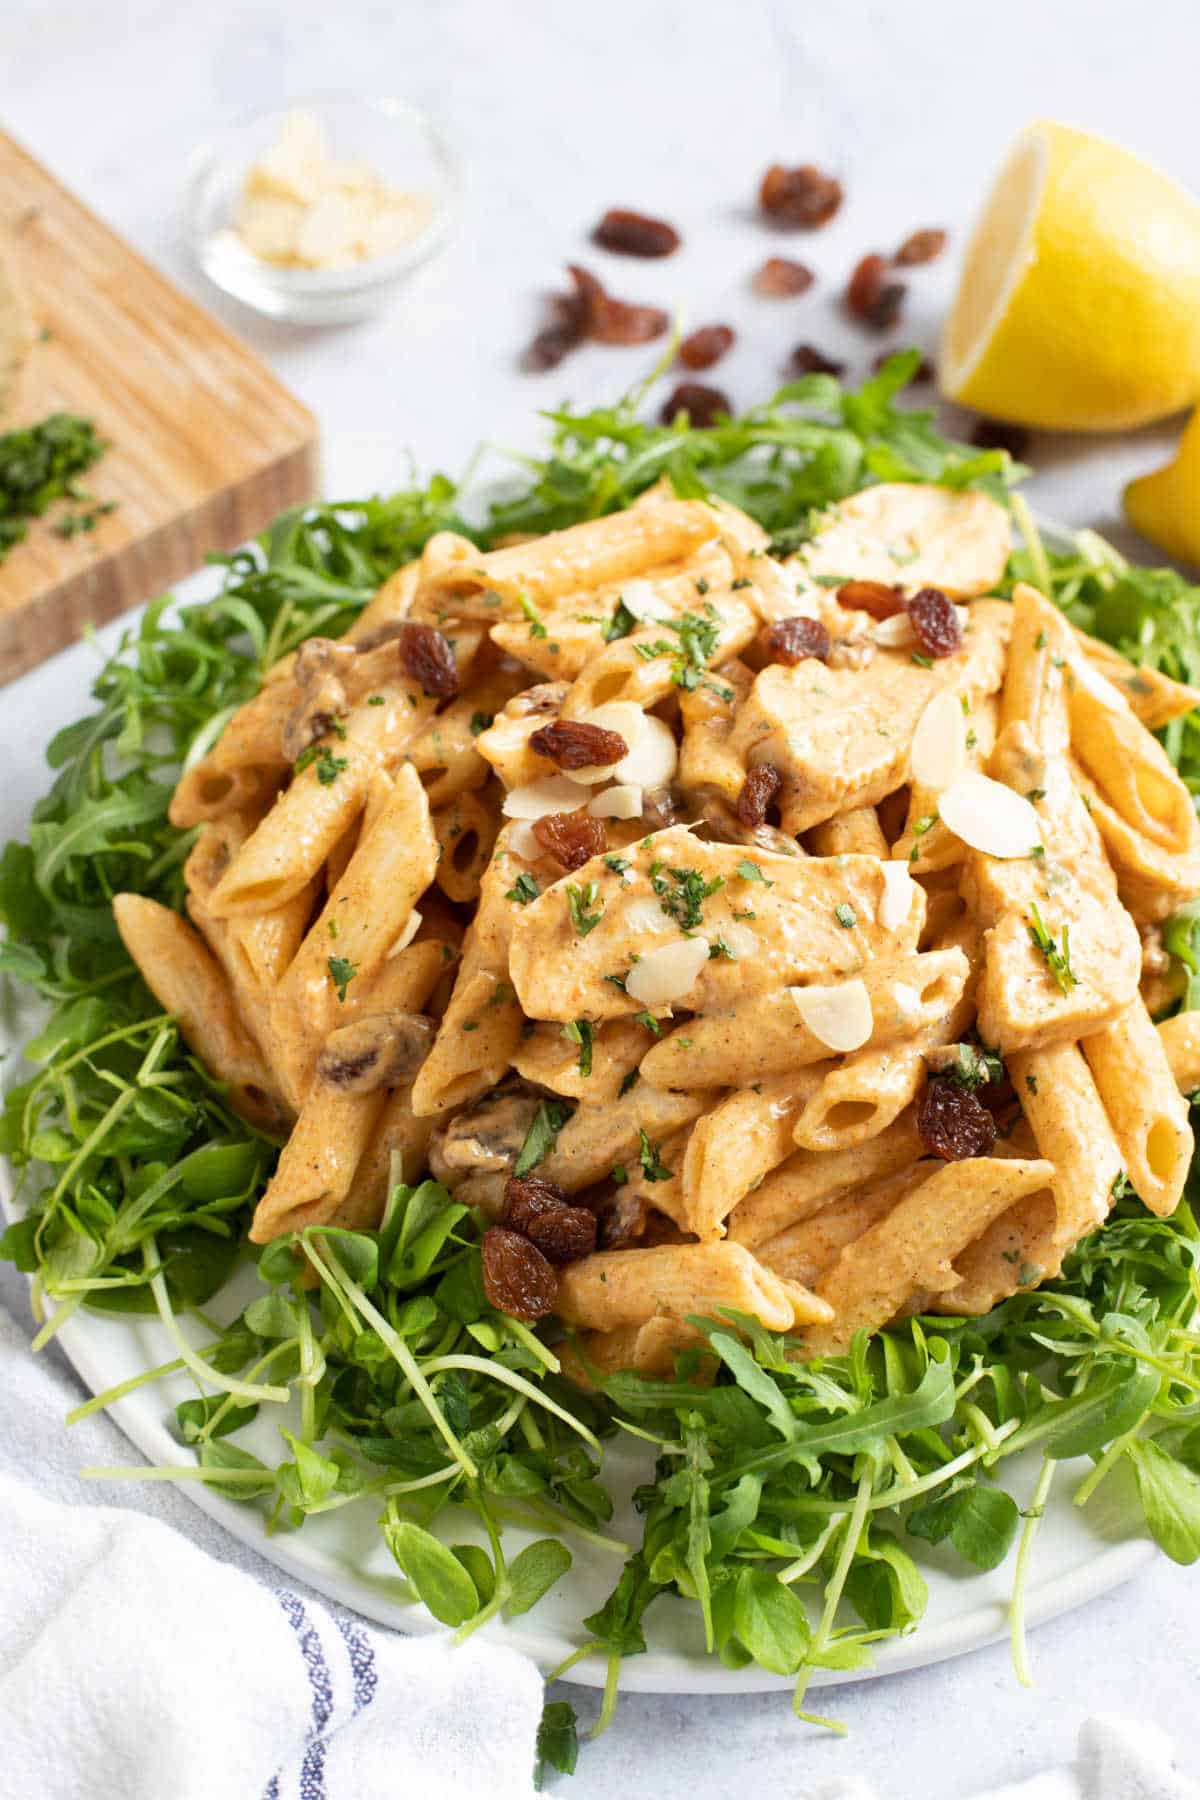 Curried chicken pasta salad on a bed of rocket leaves.